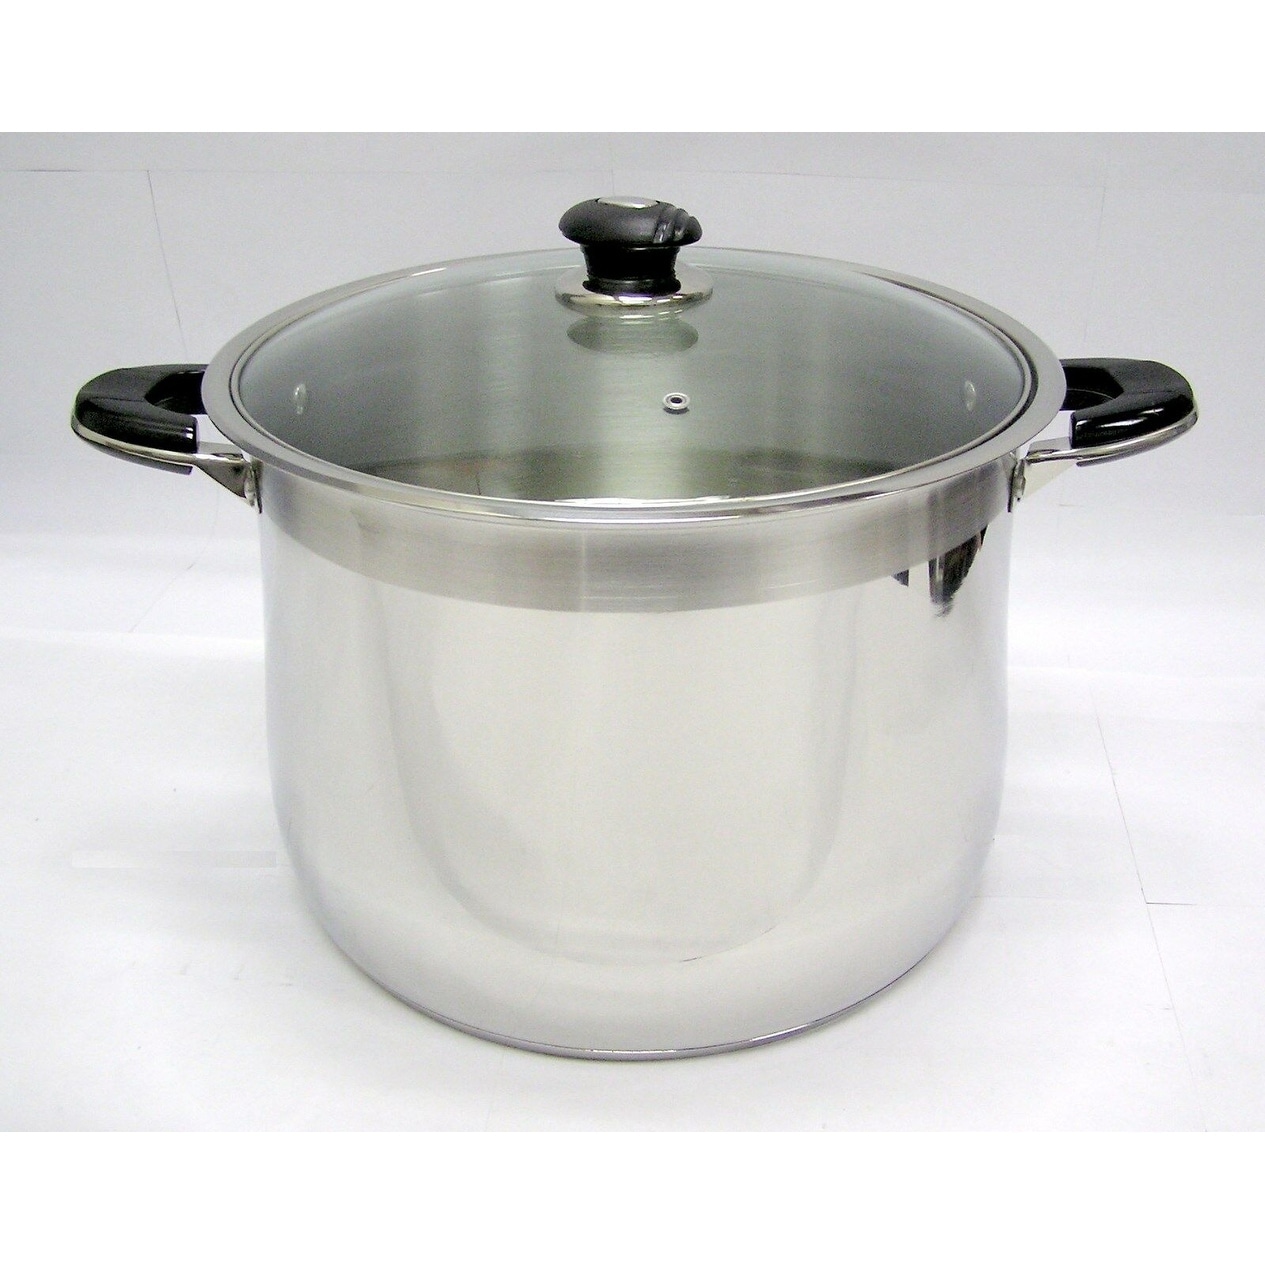 https://ak1.ostkcdn.com/images/products/is/images/direct/55231b2881771bc955d83996a5a286110e120252/24-Qt-Stainless-Steel-Tri-Ply-Clad-Heavy-Duty-Gourmet-Stock-Pot.jpg